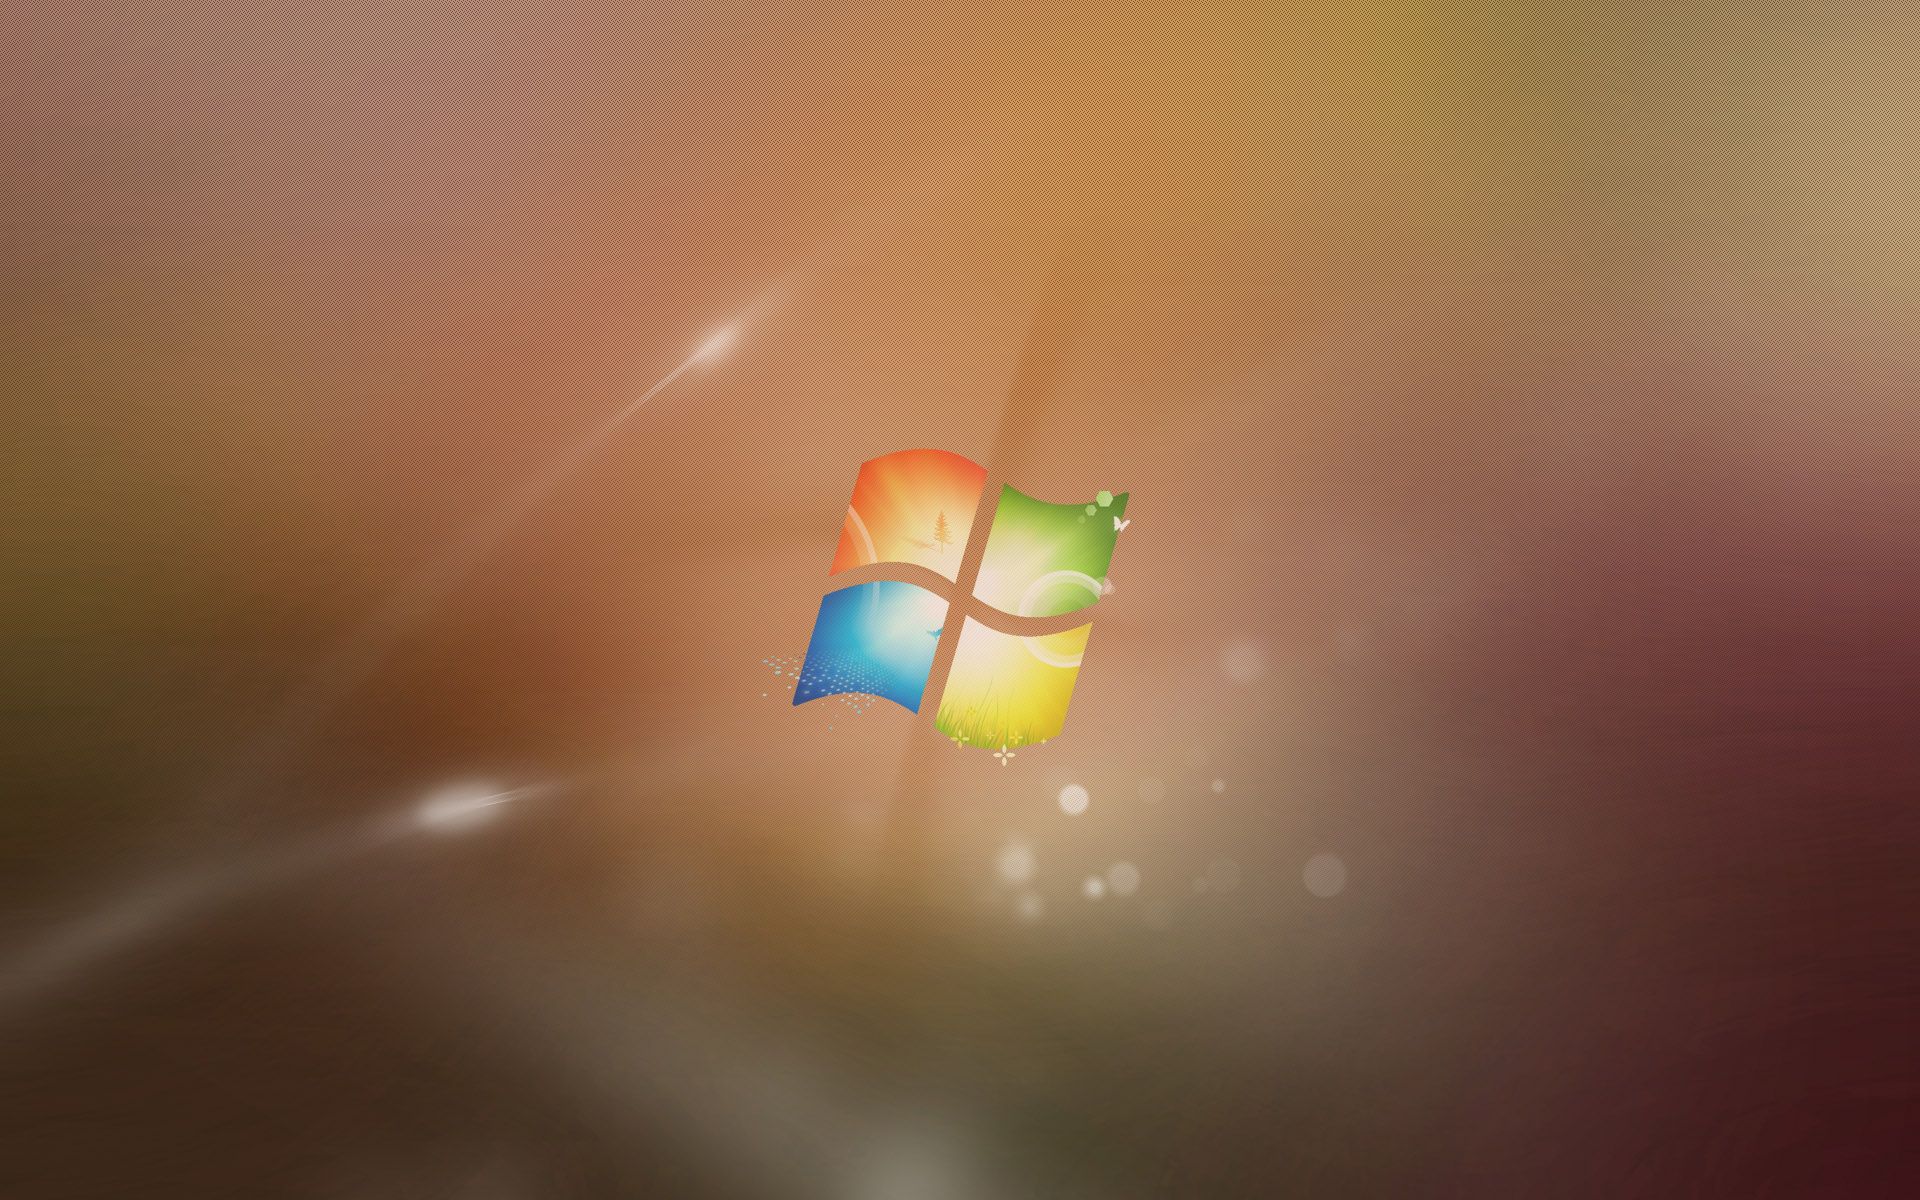 Download Microsoft Windows 8 Wallpapers Pack 1 - wallpapers - TechMynd